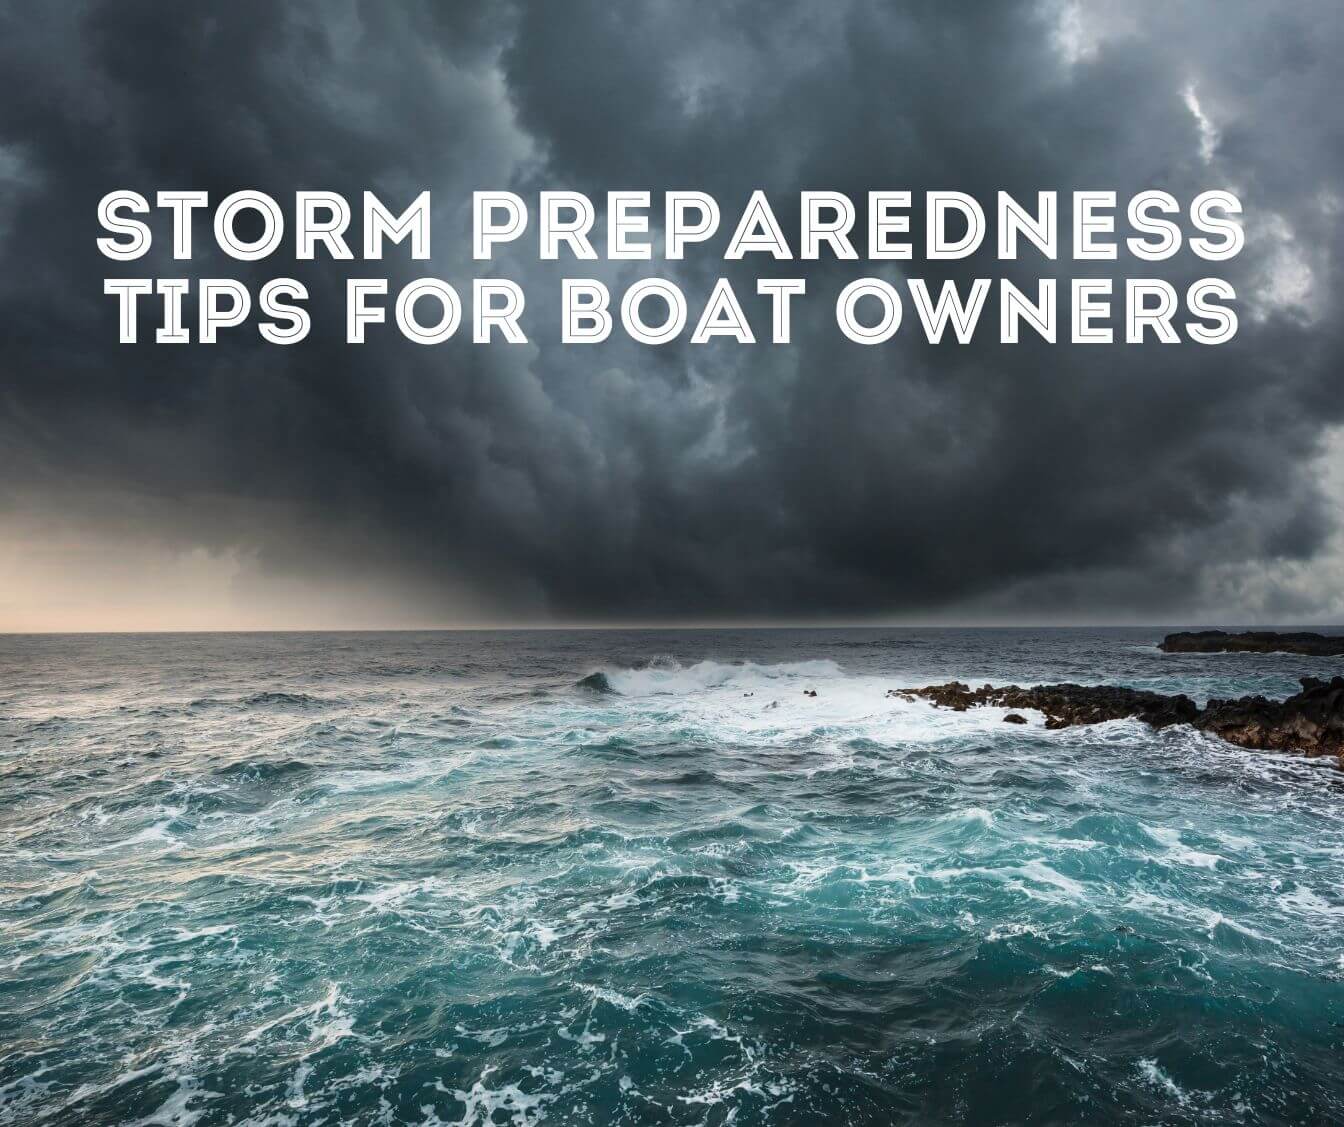 Battening Down the Hatches: Storm Preparedness Tips for Boat Owners at GCCM